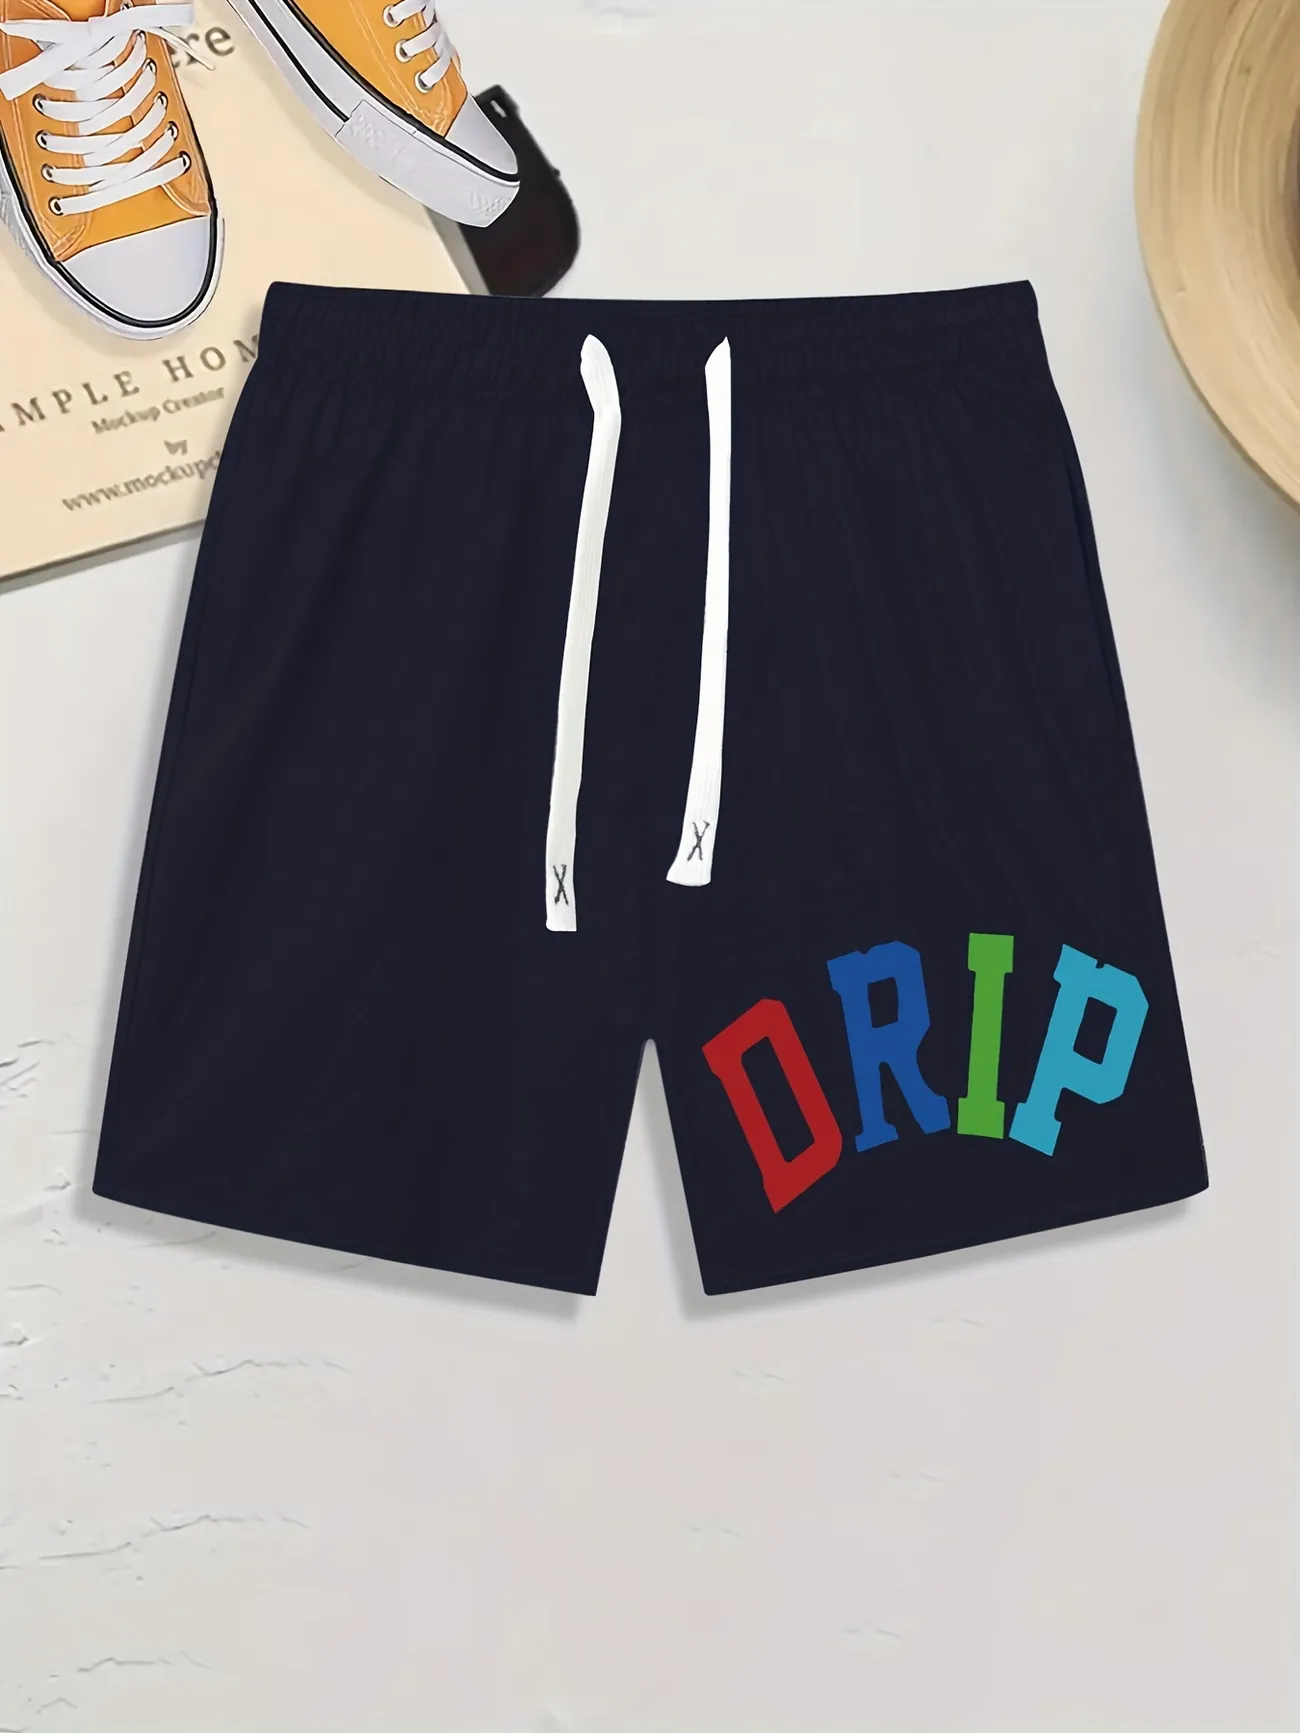 Colorful Drip Print Mens Comfy Casual Breathable Drawstring Waistband Shorts  Summer Clothing, Find Great Deals Now